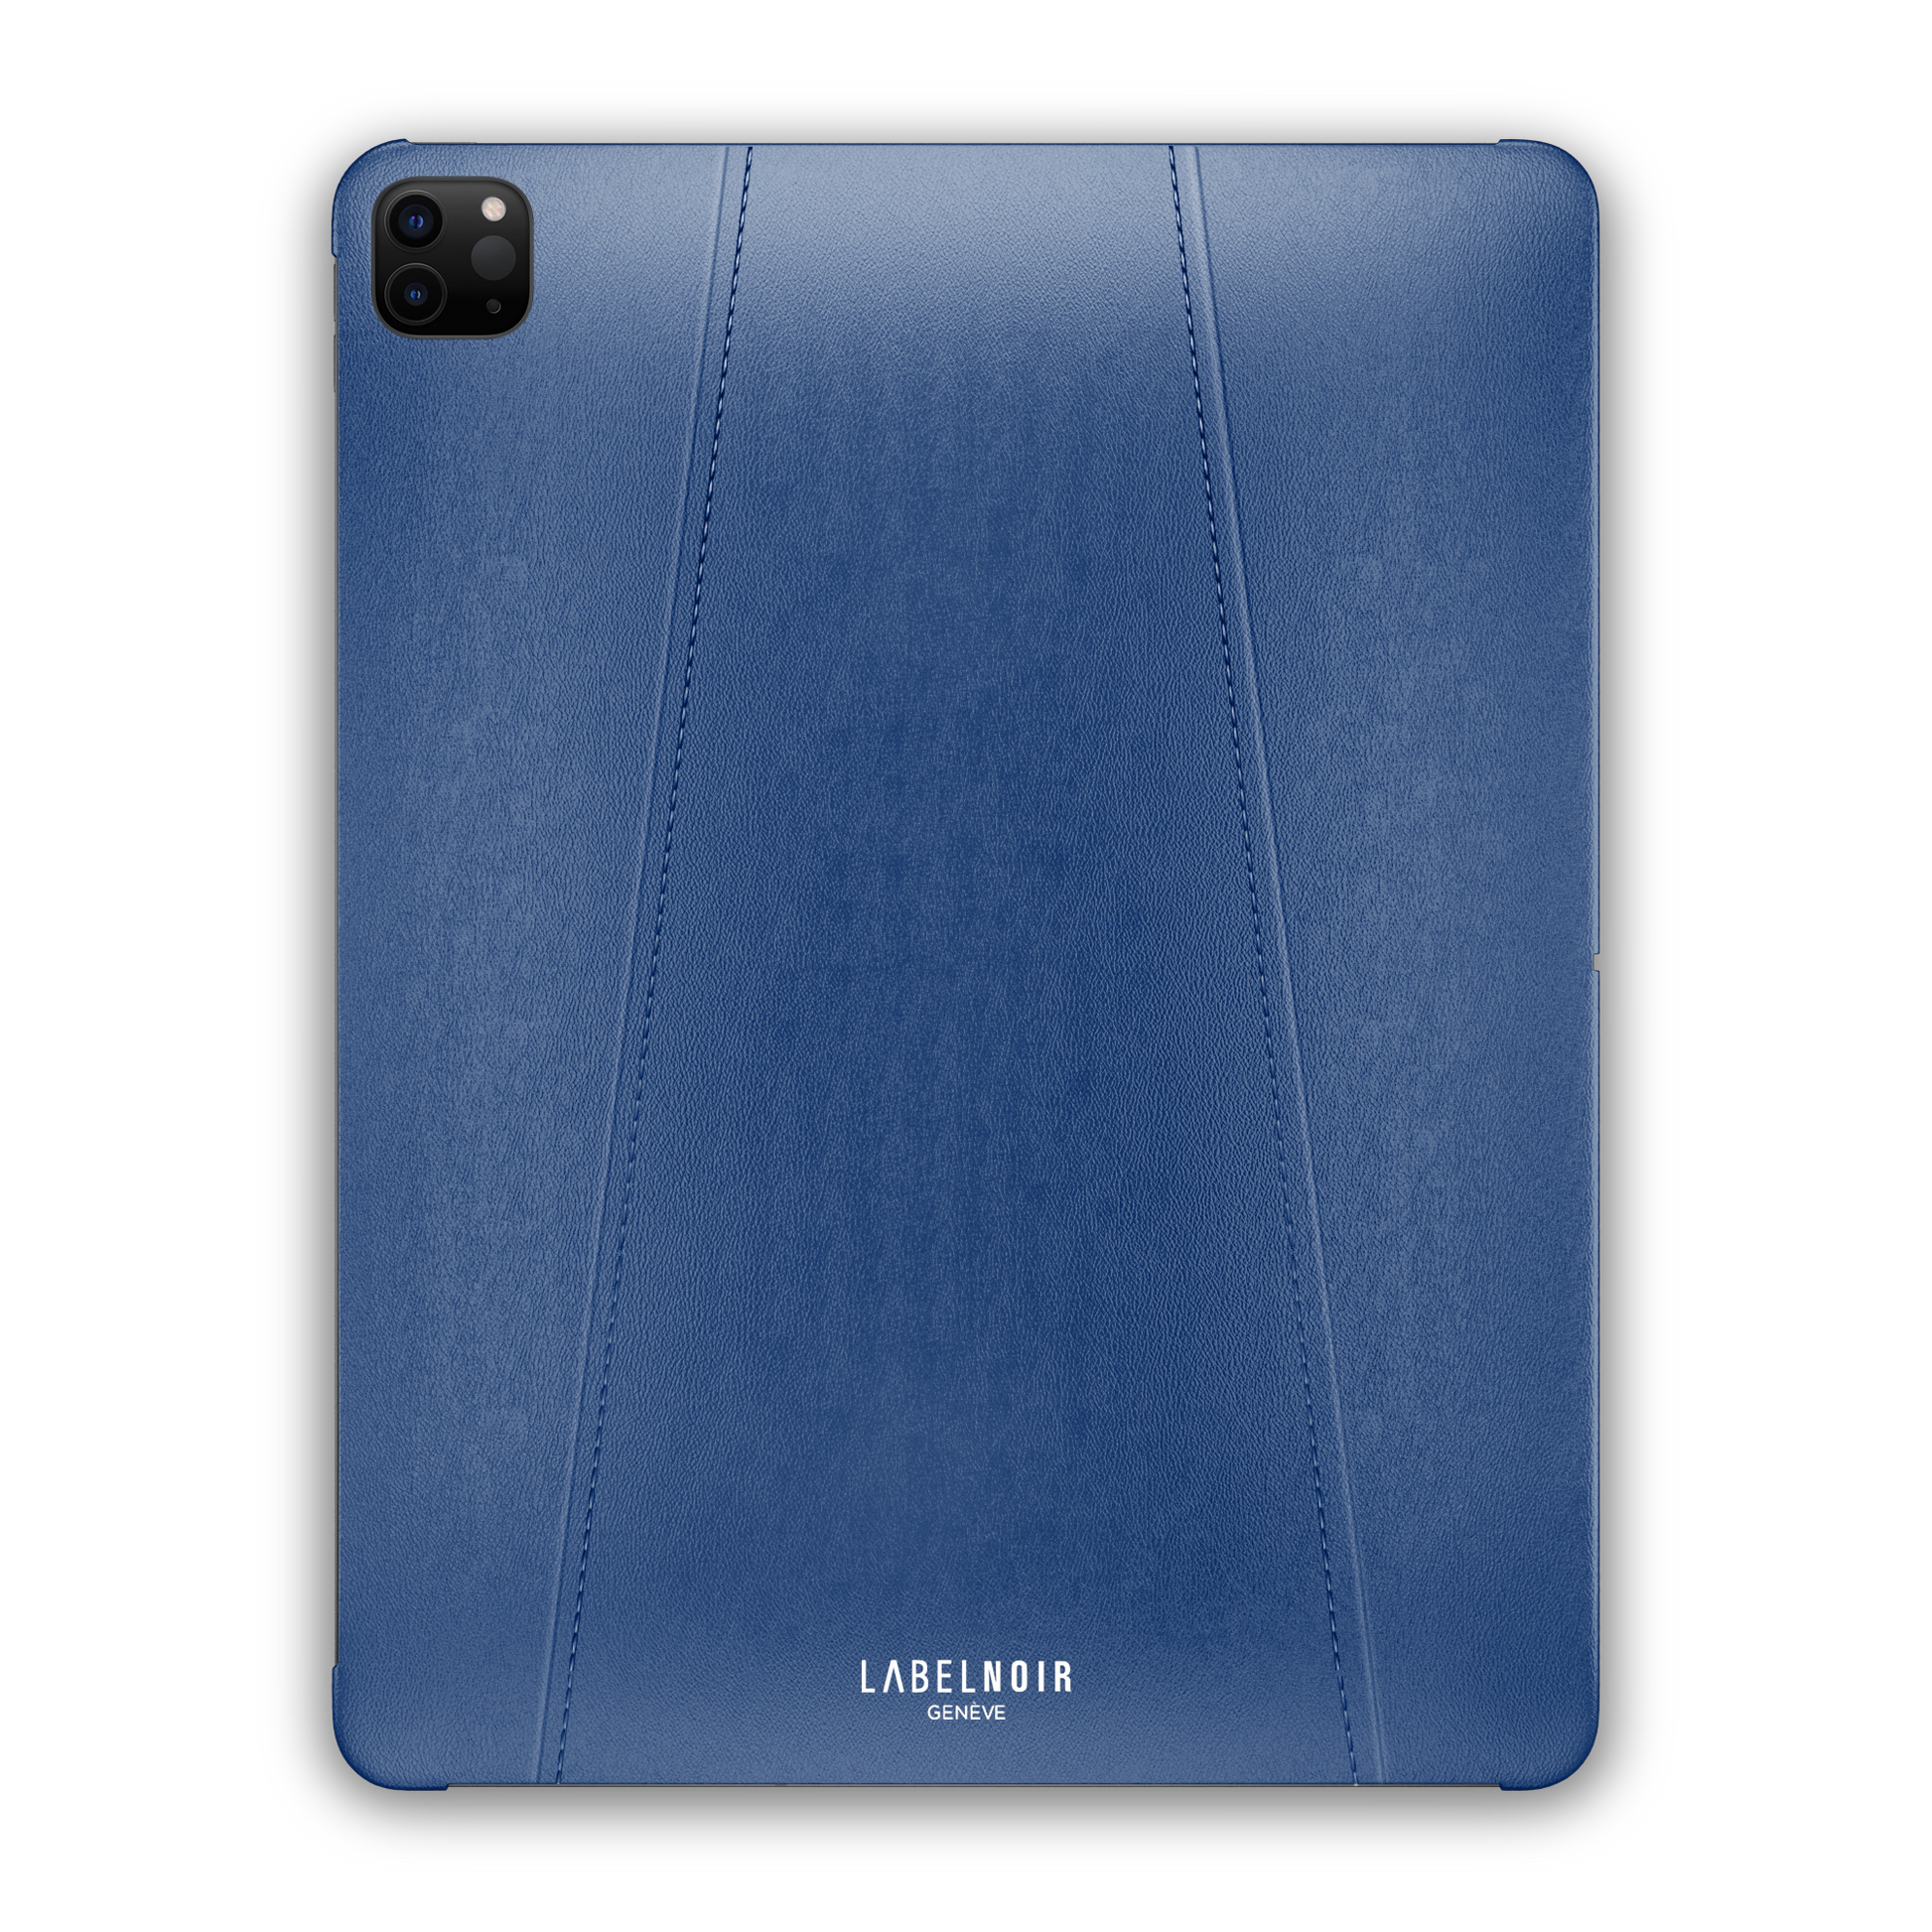 Ipad Pro (2nd-3rd-4th Gen) 11-inch Blue Leather Case